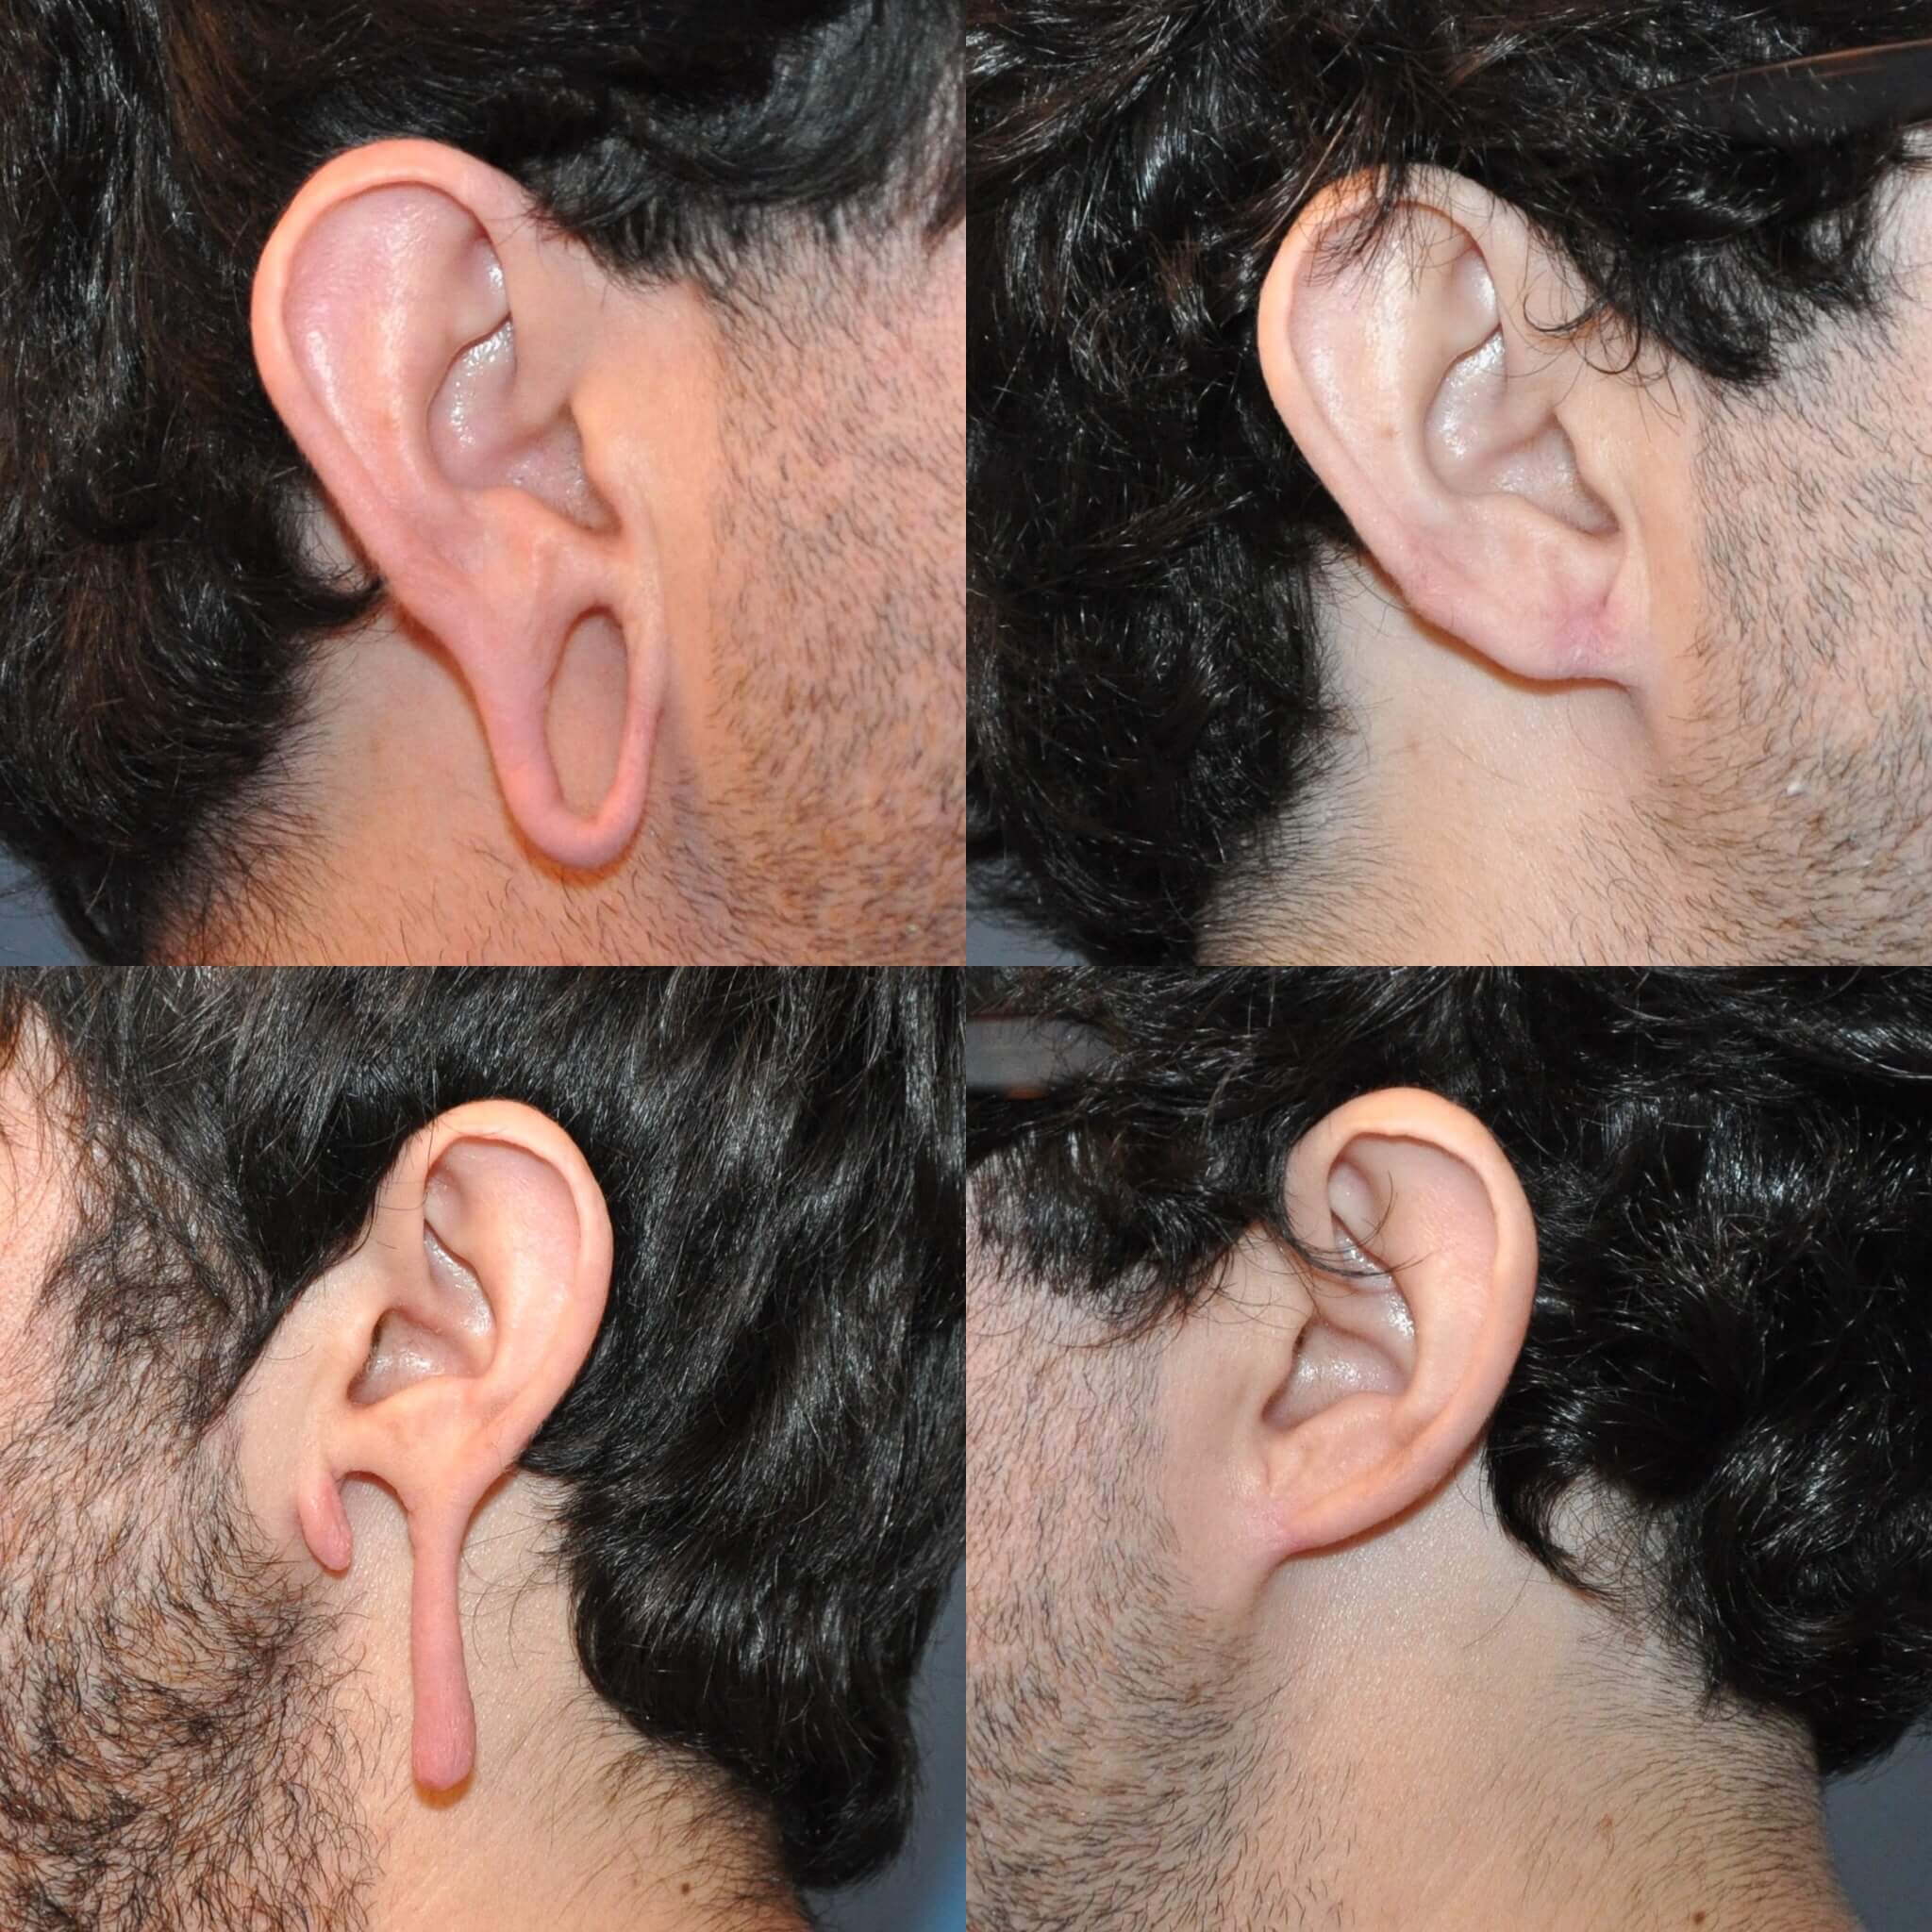 5 Questions People Ask Before an Earlobe Reconstruction Surgery